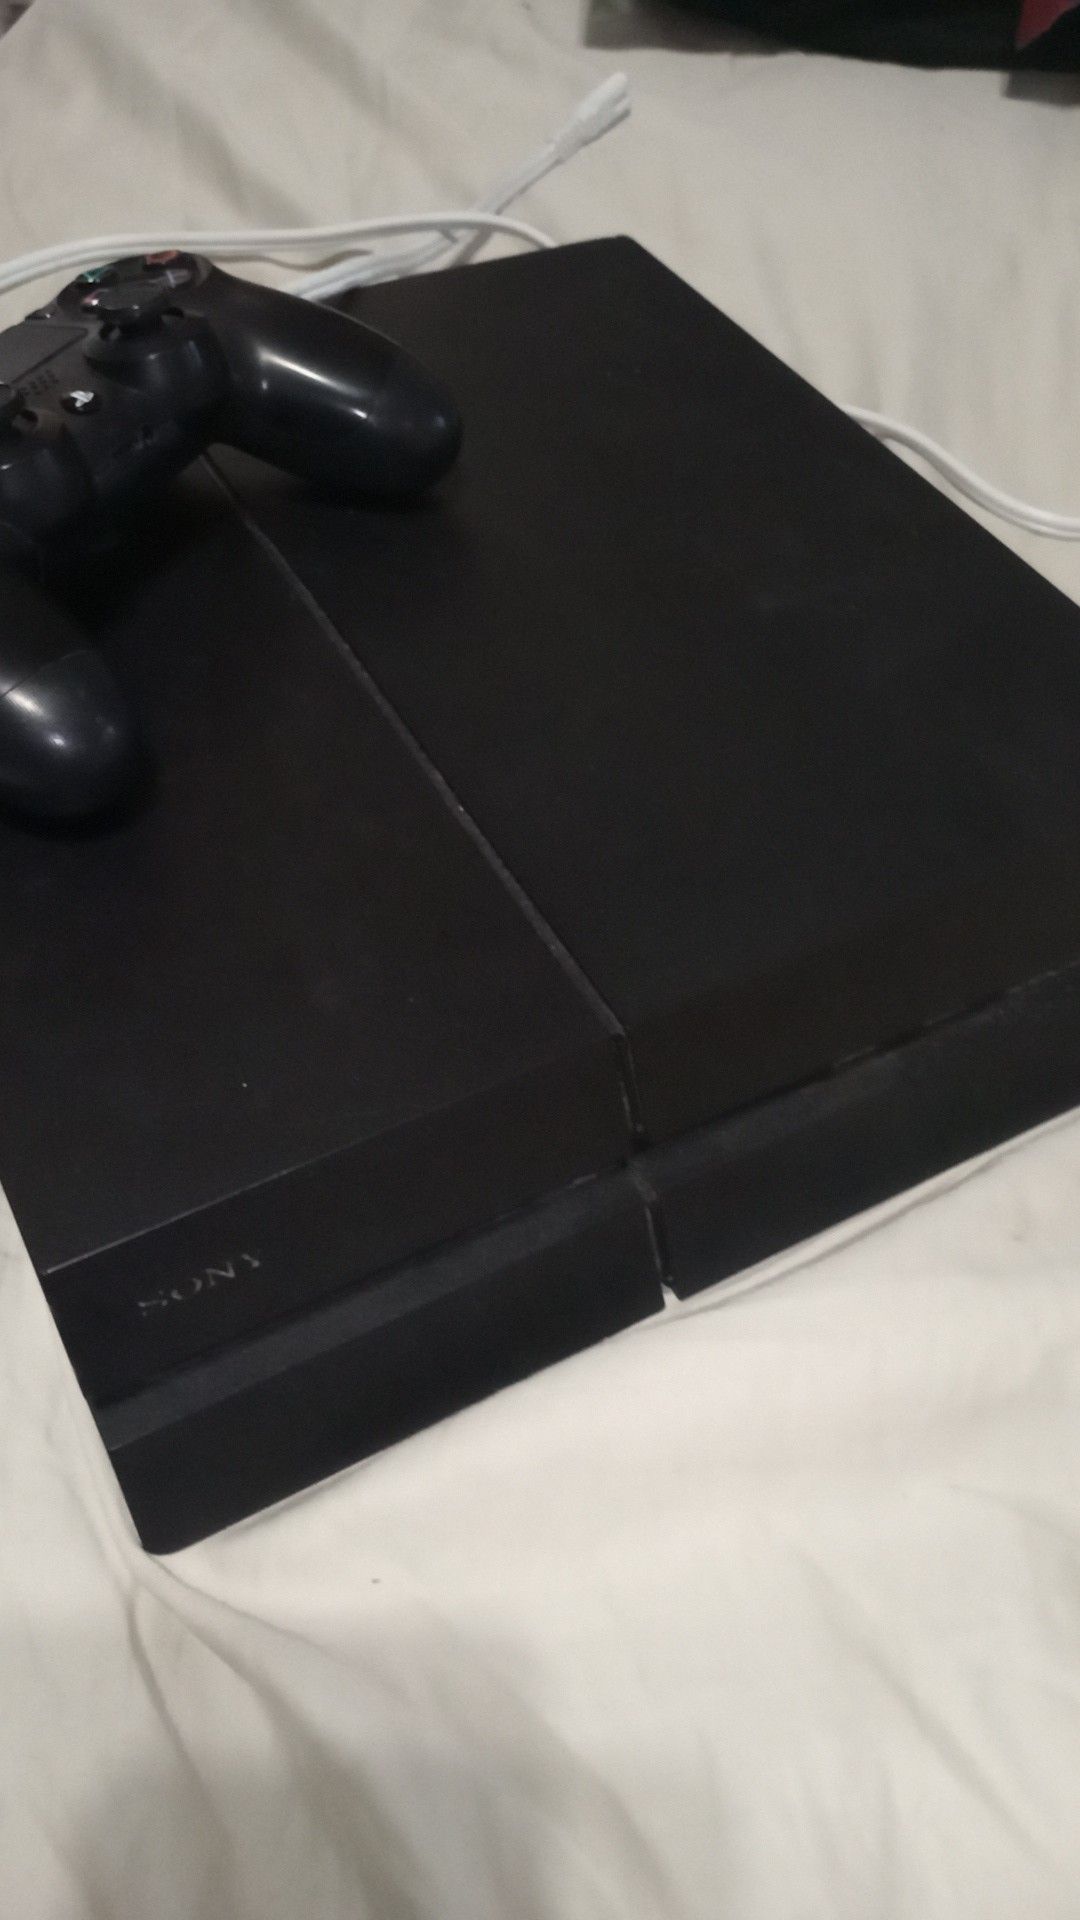 Ps4, PlayStation 4 w/ cables & controller